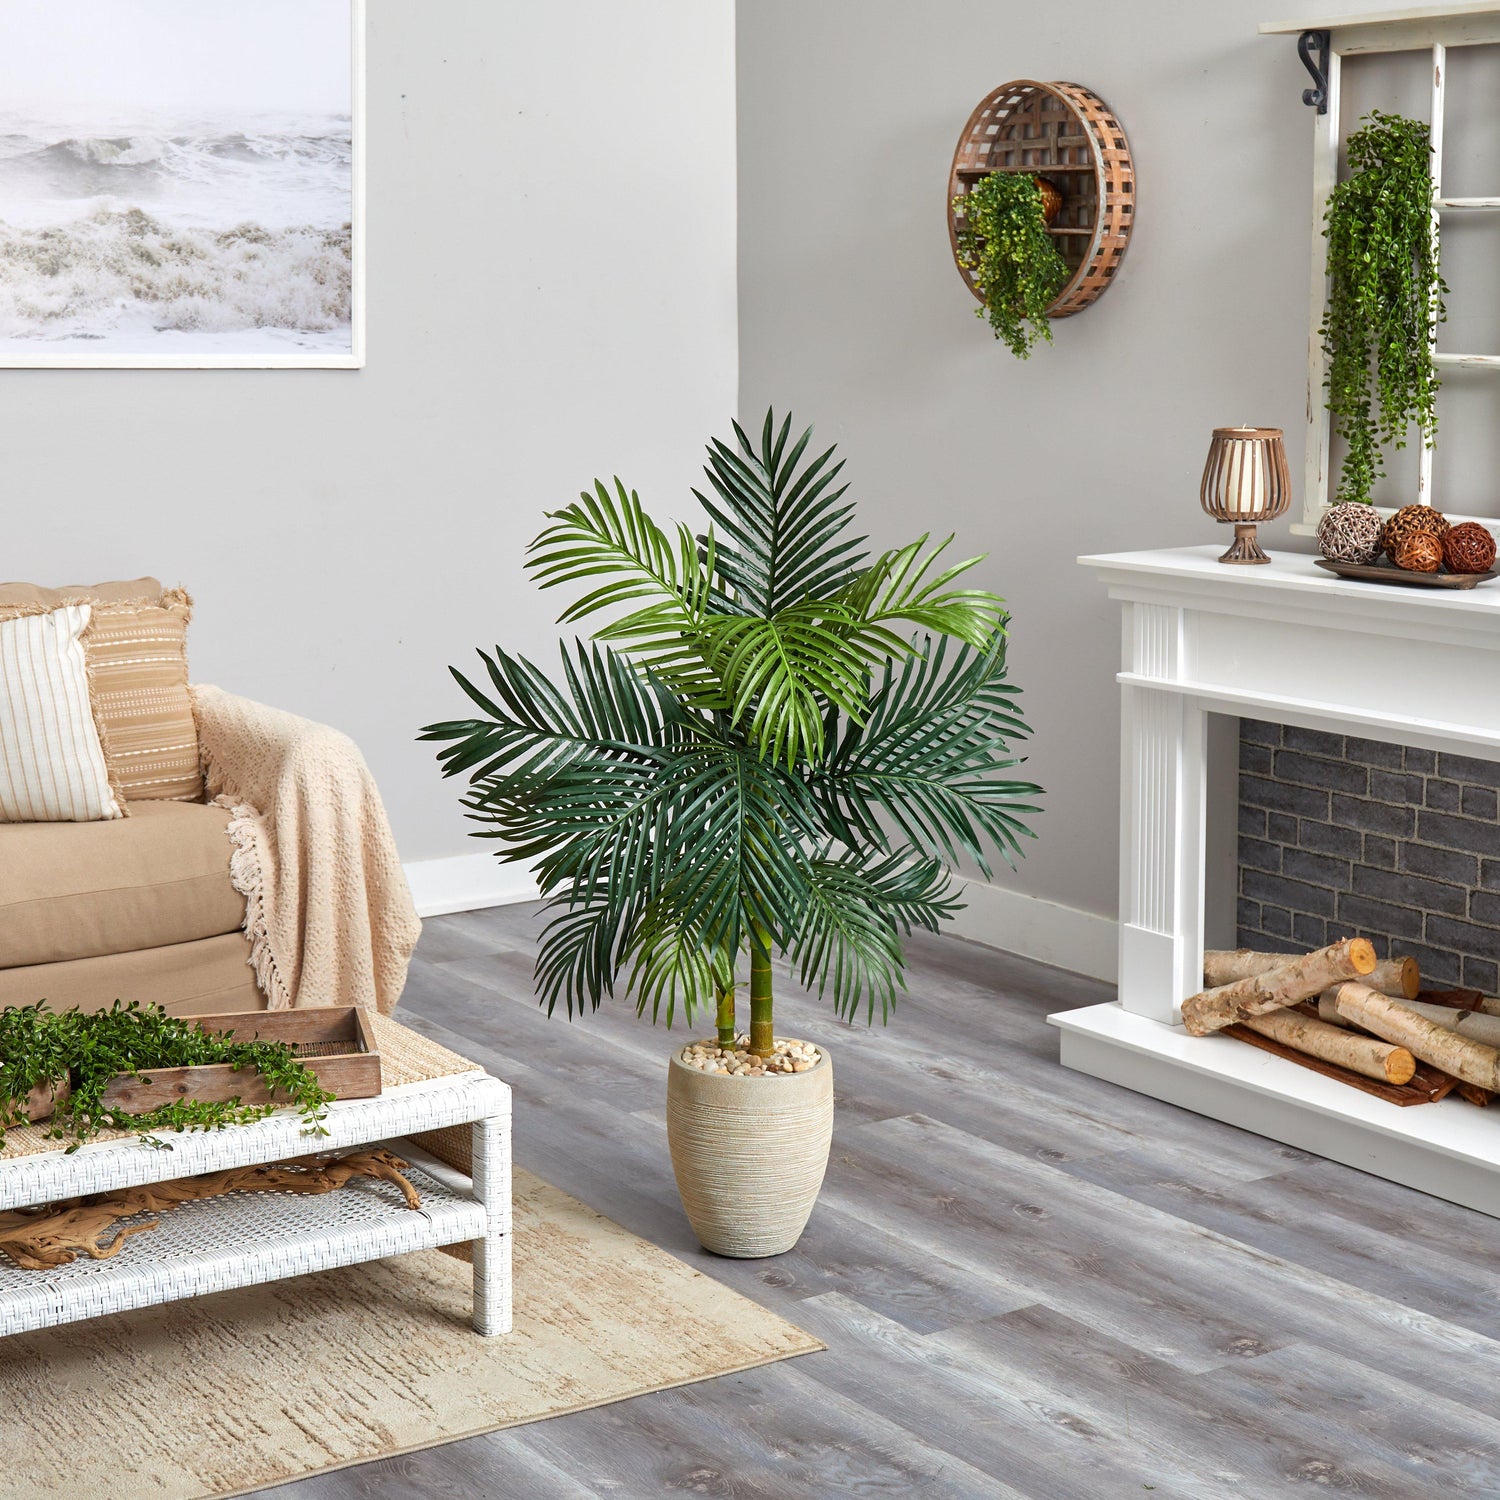 4.5’ Golden Cane Palm Artificial Tree in Oval Planter